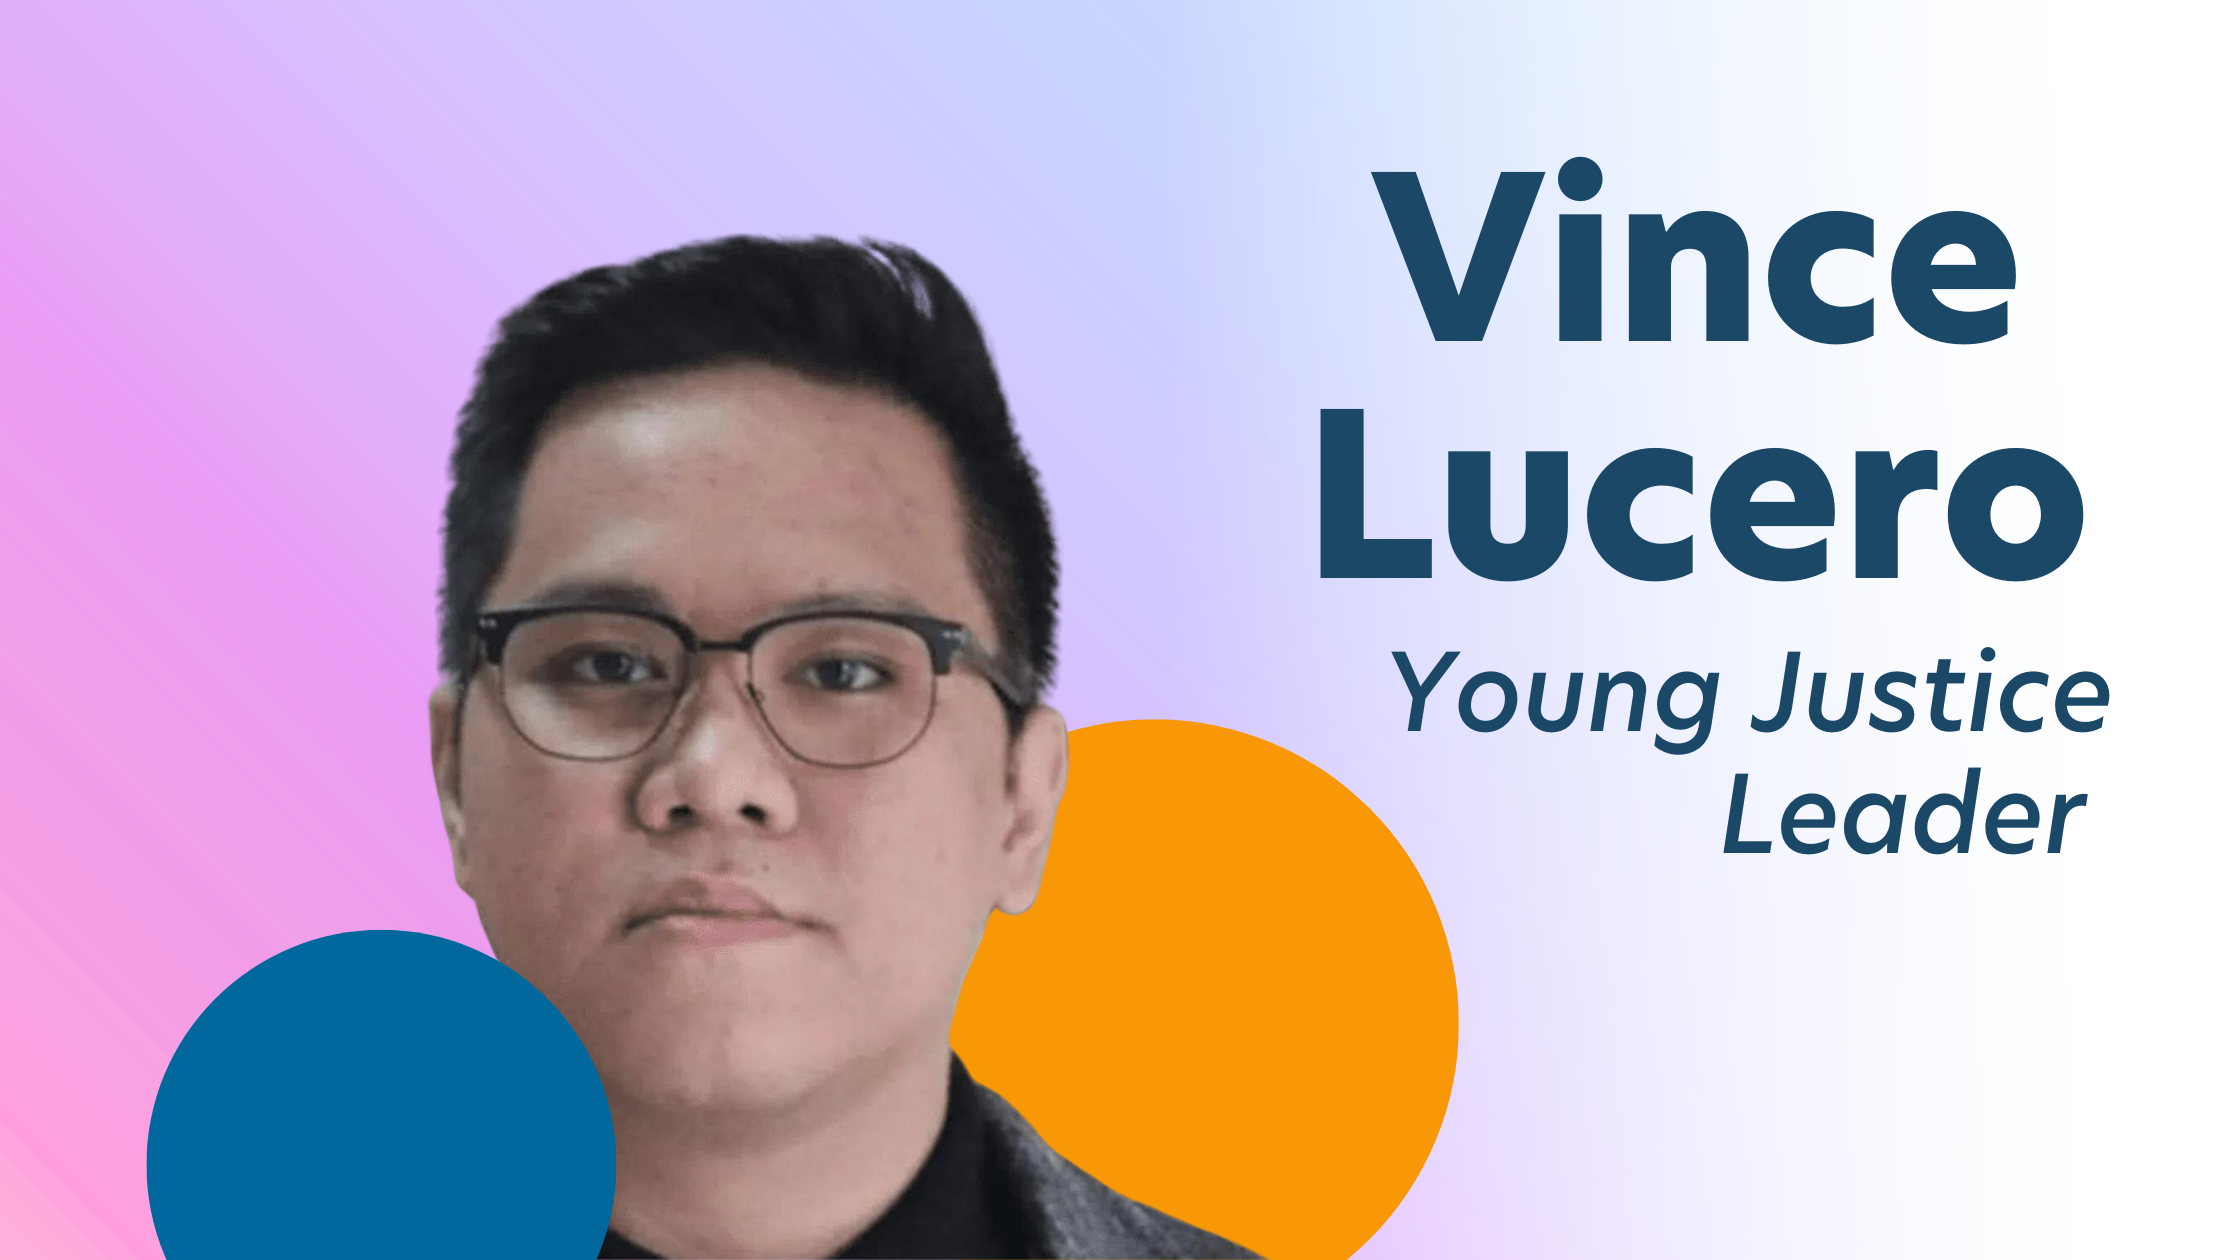 Gradient (pink-purple) background with a headshot of a person with glasses. Text reads: "Vince Lucero; Young Justice Leader"